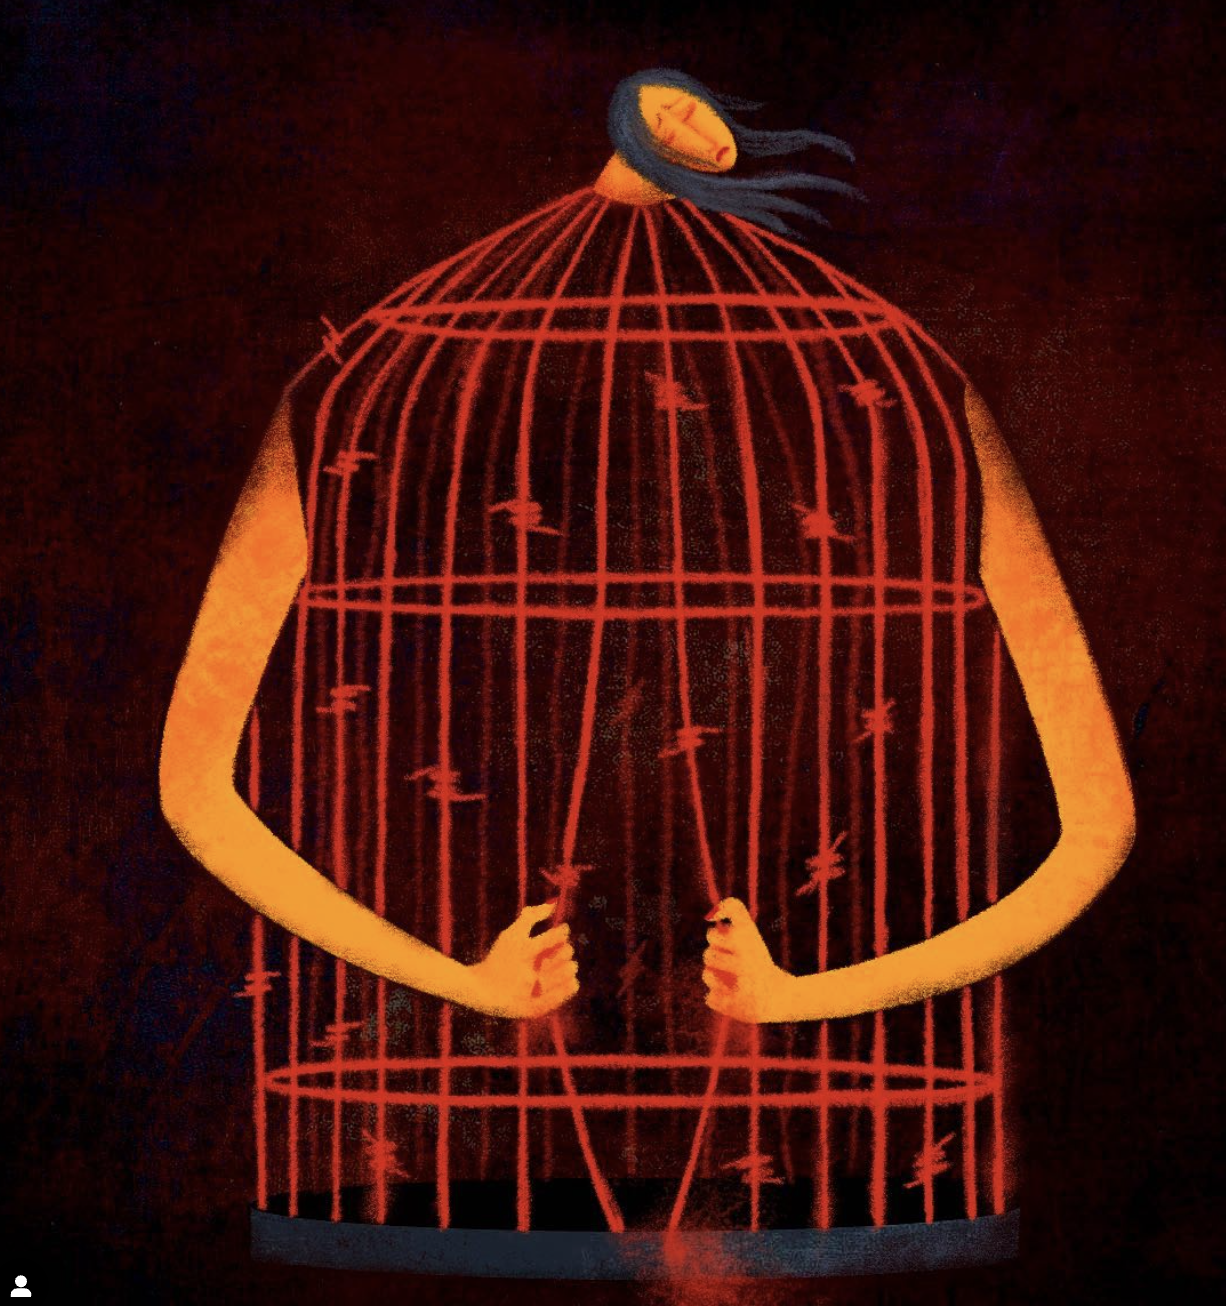 Image of a femme person with yellow skin, a look of woe, and a birdcage barbed wire body, being yanked open, bleeding at the hands...